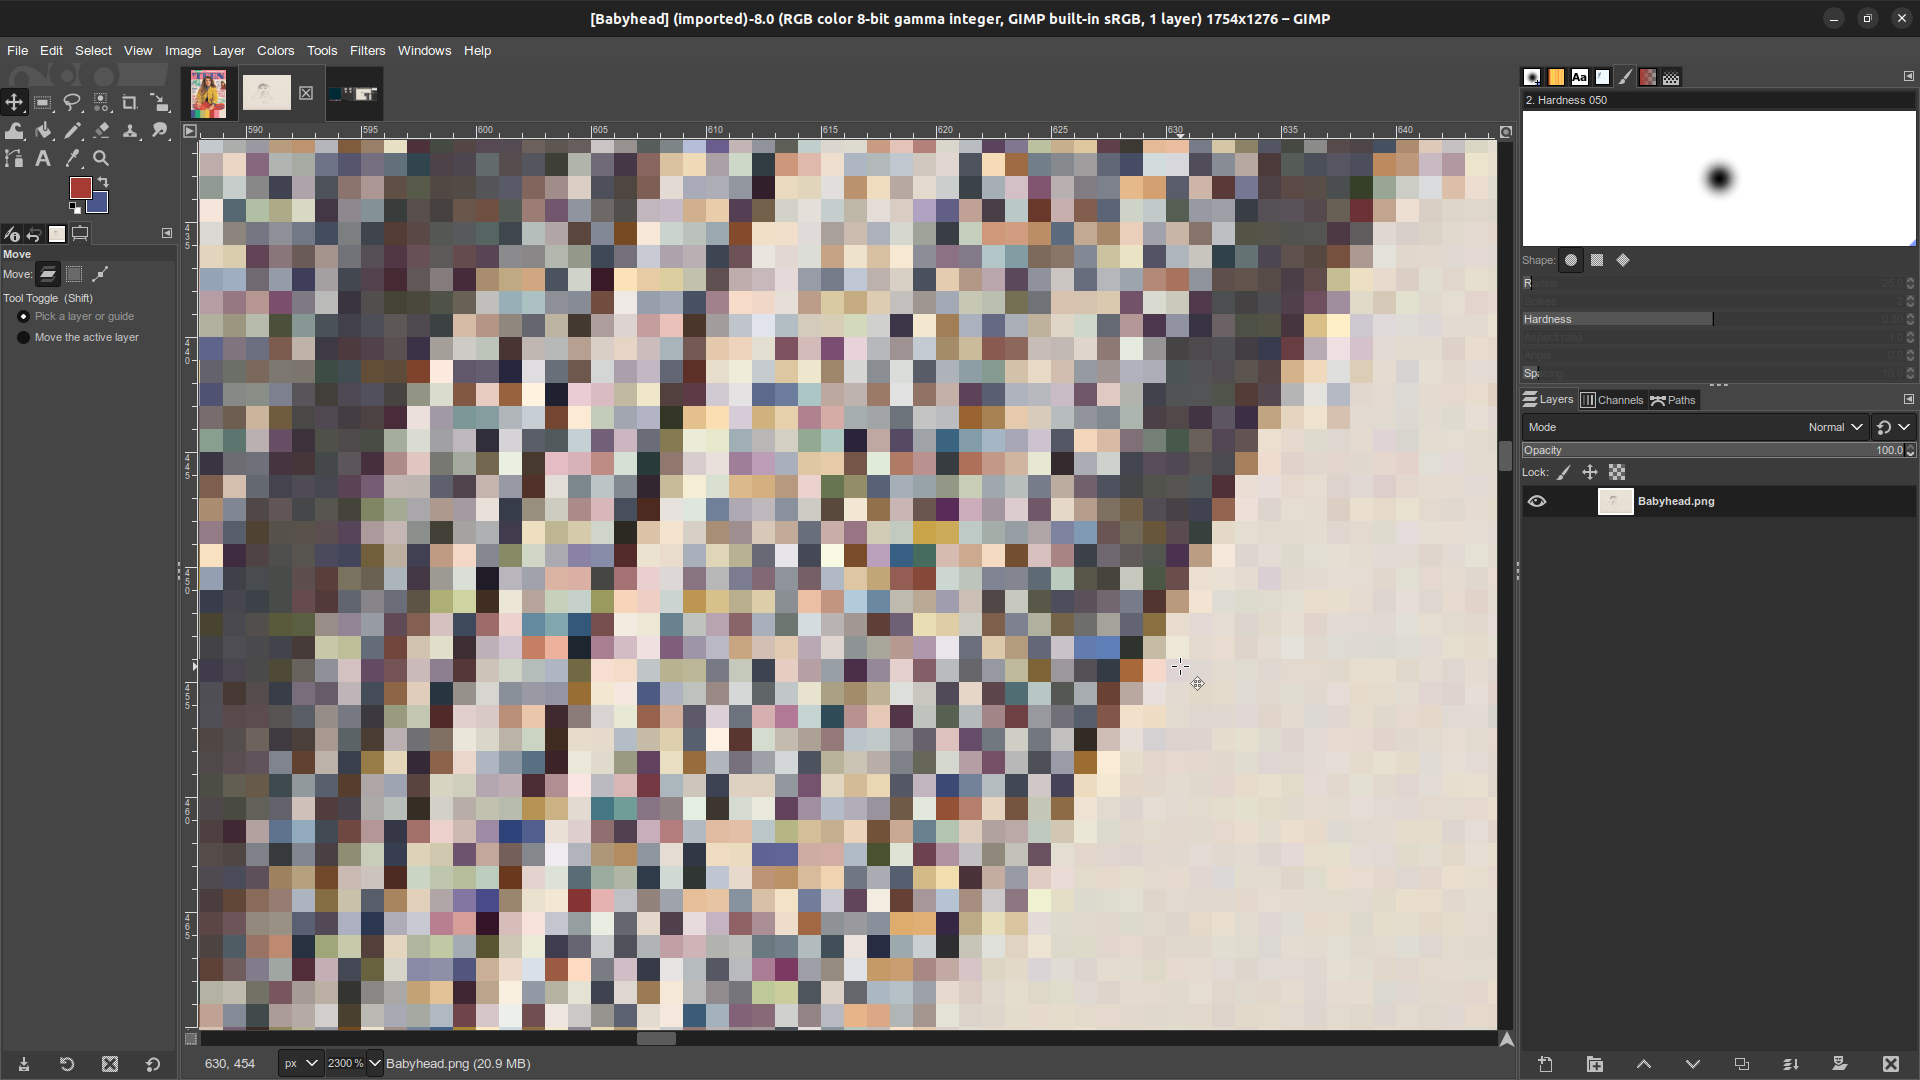 GIMP window, zoomed in close on the Babyhead monster's hair. Before transitioning to greyscale the pixels display a spectrum of muted colors.